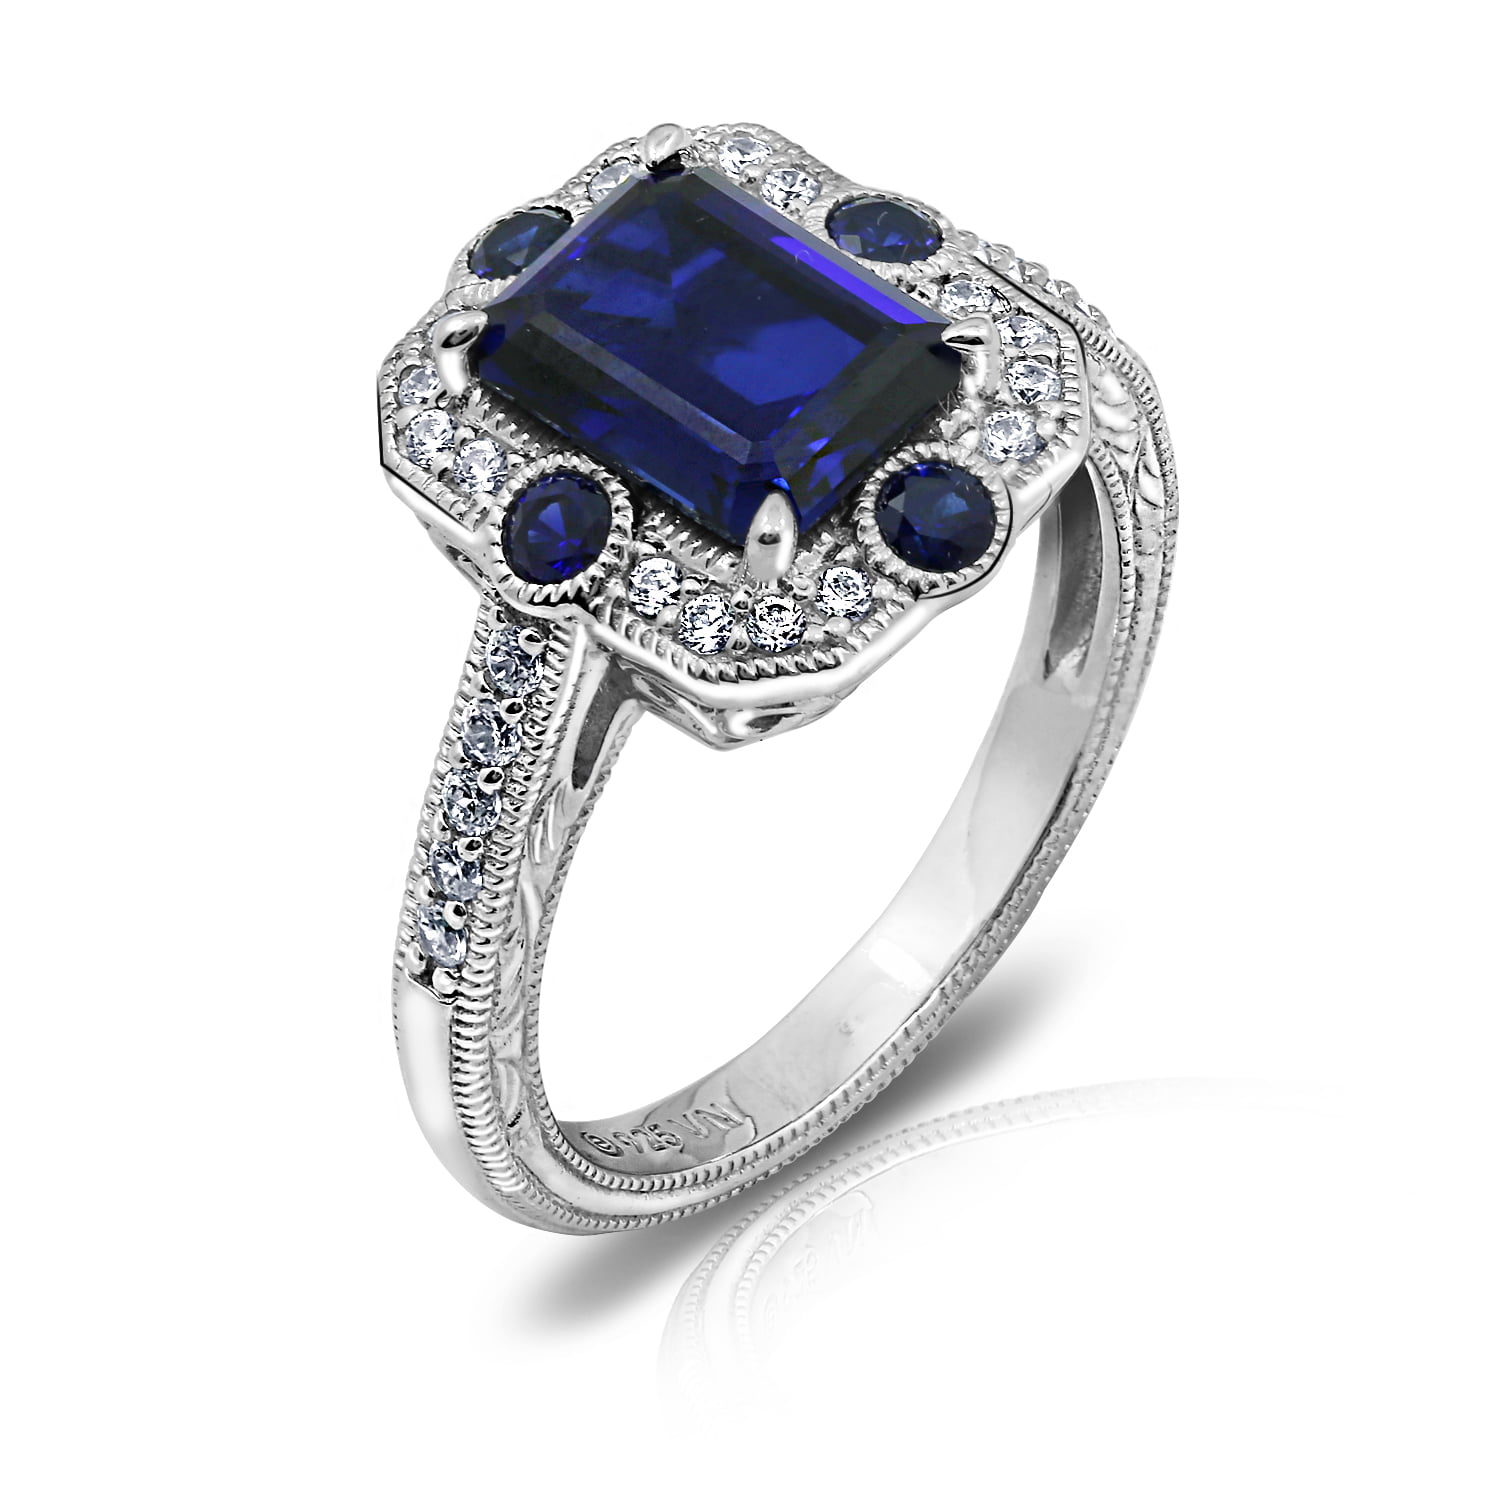 Details about  / Best Quality Round Shape Zircon Sapphire Gemstone 925 Silver Ring Gift For Women